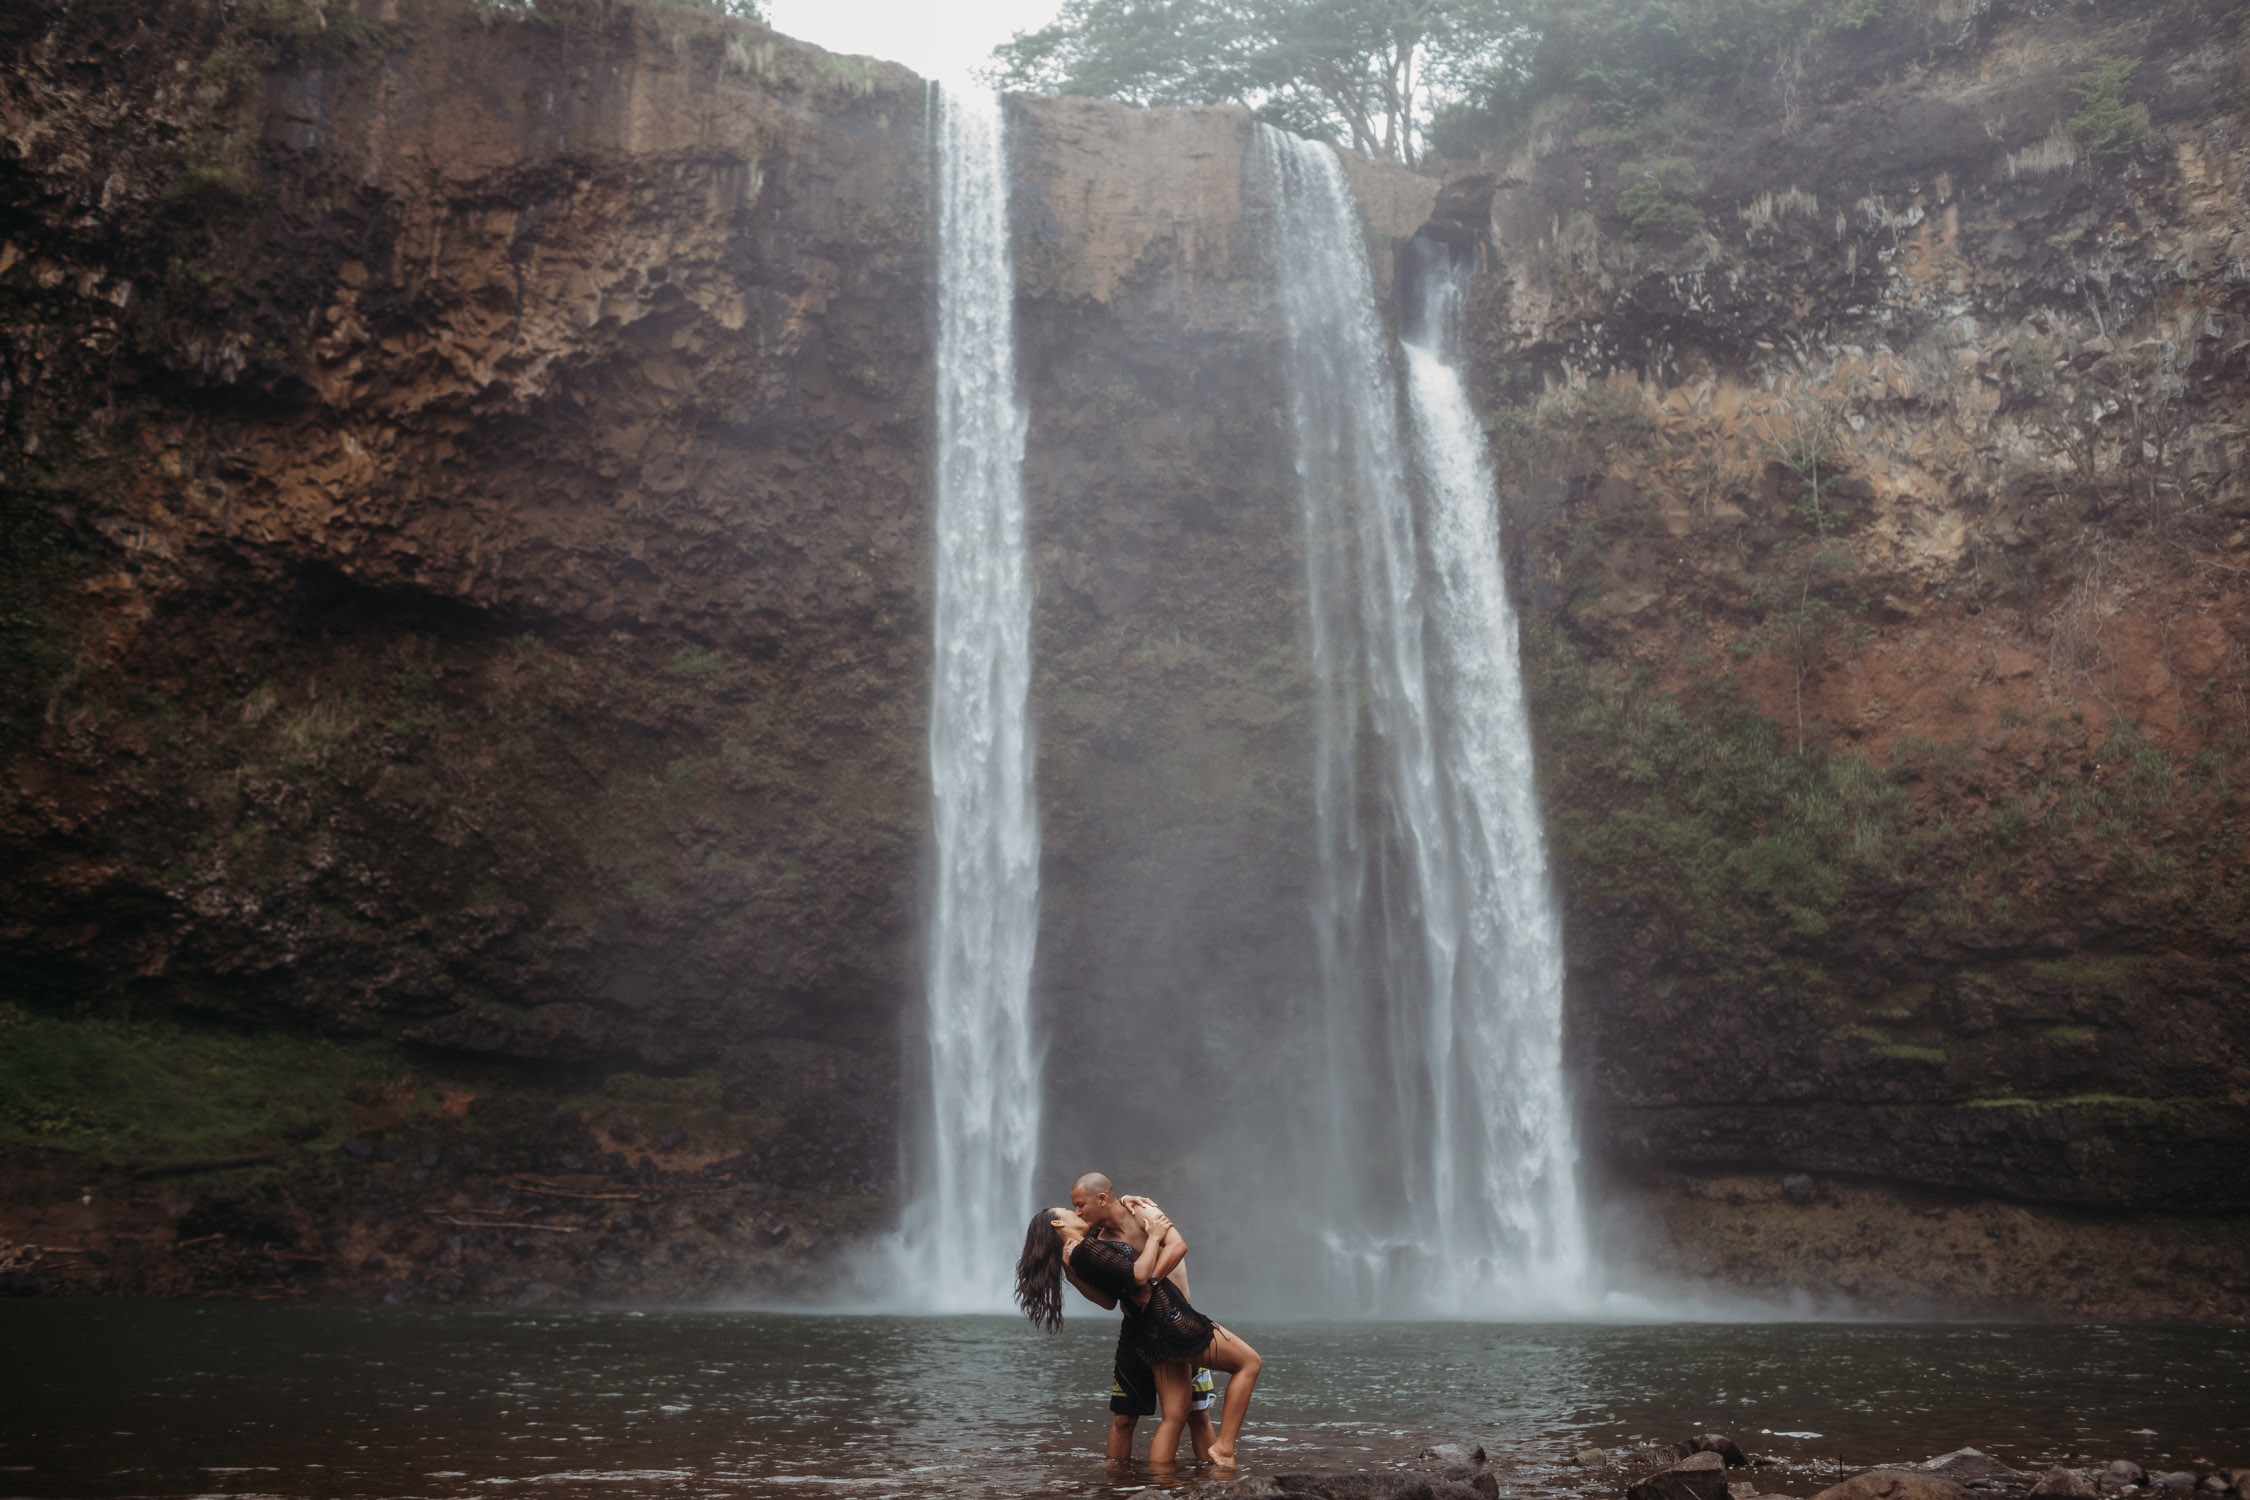 Couple kisses in front of a large waterfall during their Hawaii engagement photoshoot by Liz Koston.